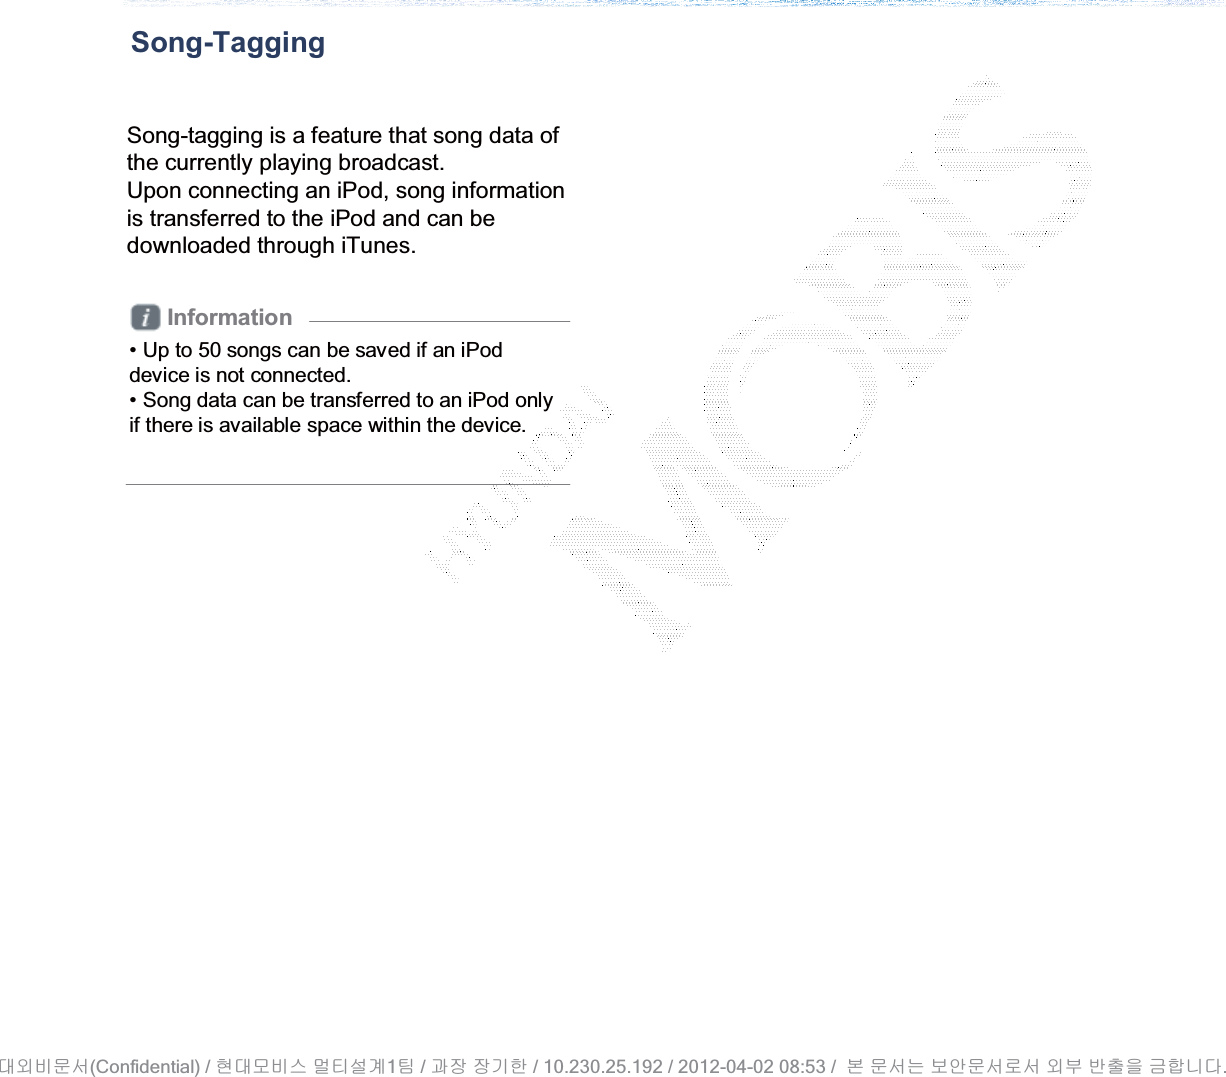 Song-TaggingSong-tagging is a feature that song data of the currently playing broadcast. Upon connecting an iPod, song information is transferred to the iPod and can be downloaded through iTunes.Information• Up to 50 songs can be saved if an iPod device is not connected. • Song data can be transferred to an iPod only if there is available space within the device.(Confidential) /    1  /     / 10.230.25.192 / 2012-04-02 08:53 /             .␴㞬⽸ⱬ㉐ 䜸␴⯜⽸㏘ ⭴䐤㉘᷸ 䐴 Ḱ㣙 㣙ὤ䚐 ⸬ ⱬ㉐⏈ ⸨㙼ⱬ㉐⦐㉐ 㞬⺴ ⵌ㻐㡸 Ἴ䚝⏼␘